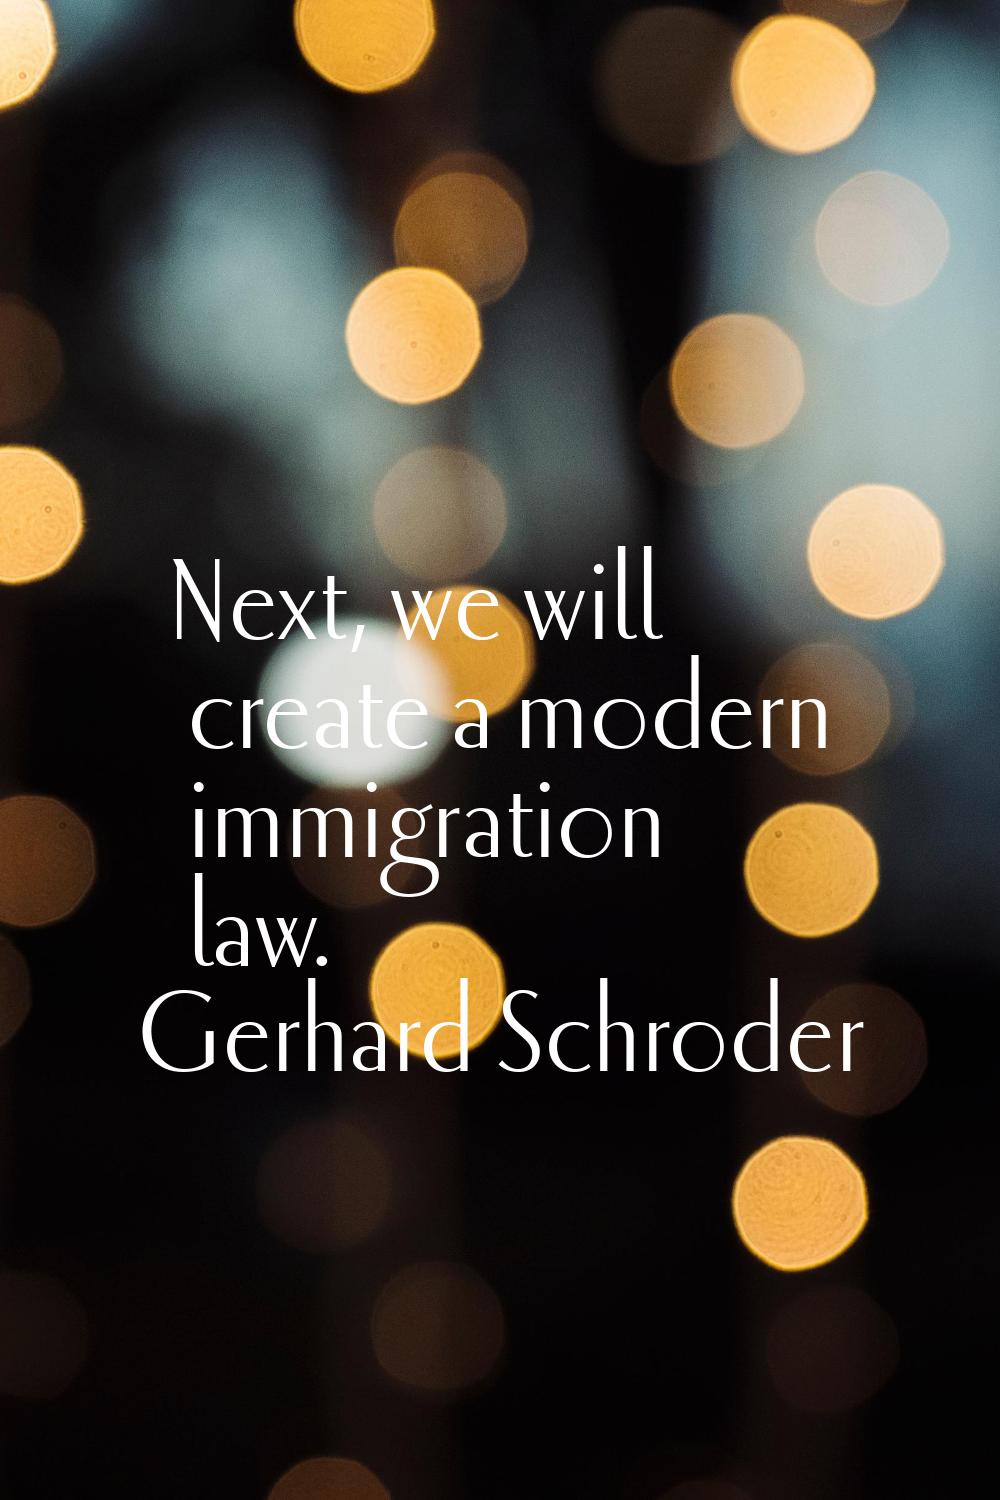 Next, we will create a modern immigration law.